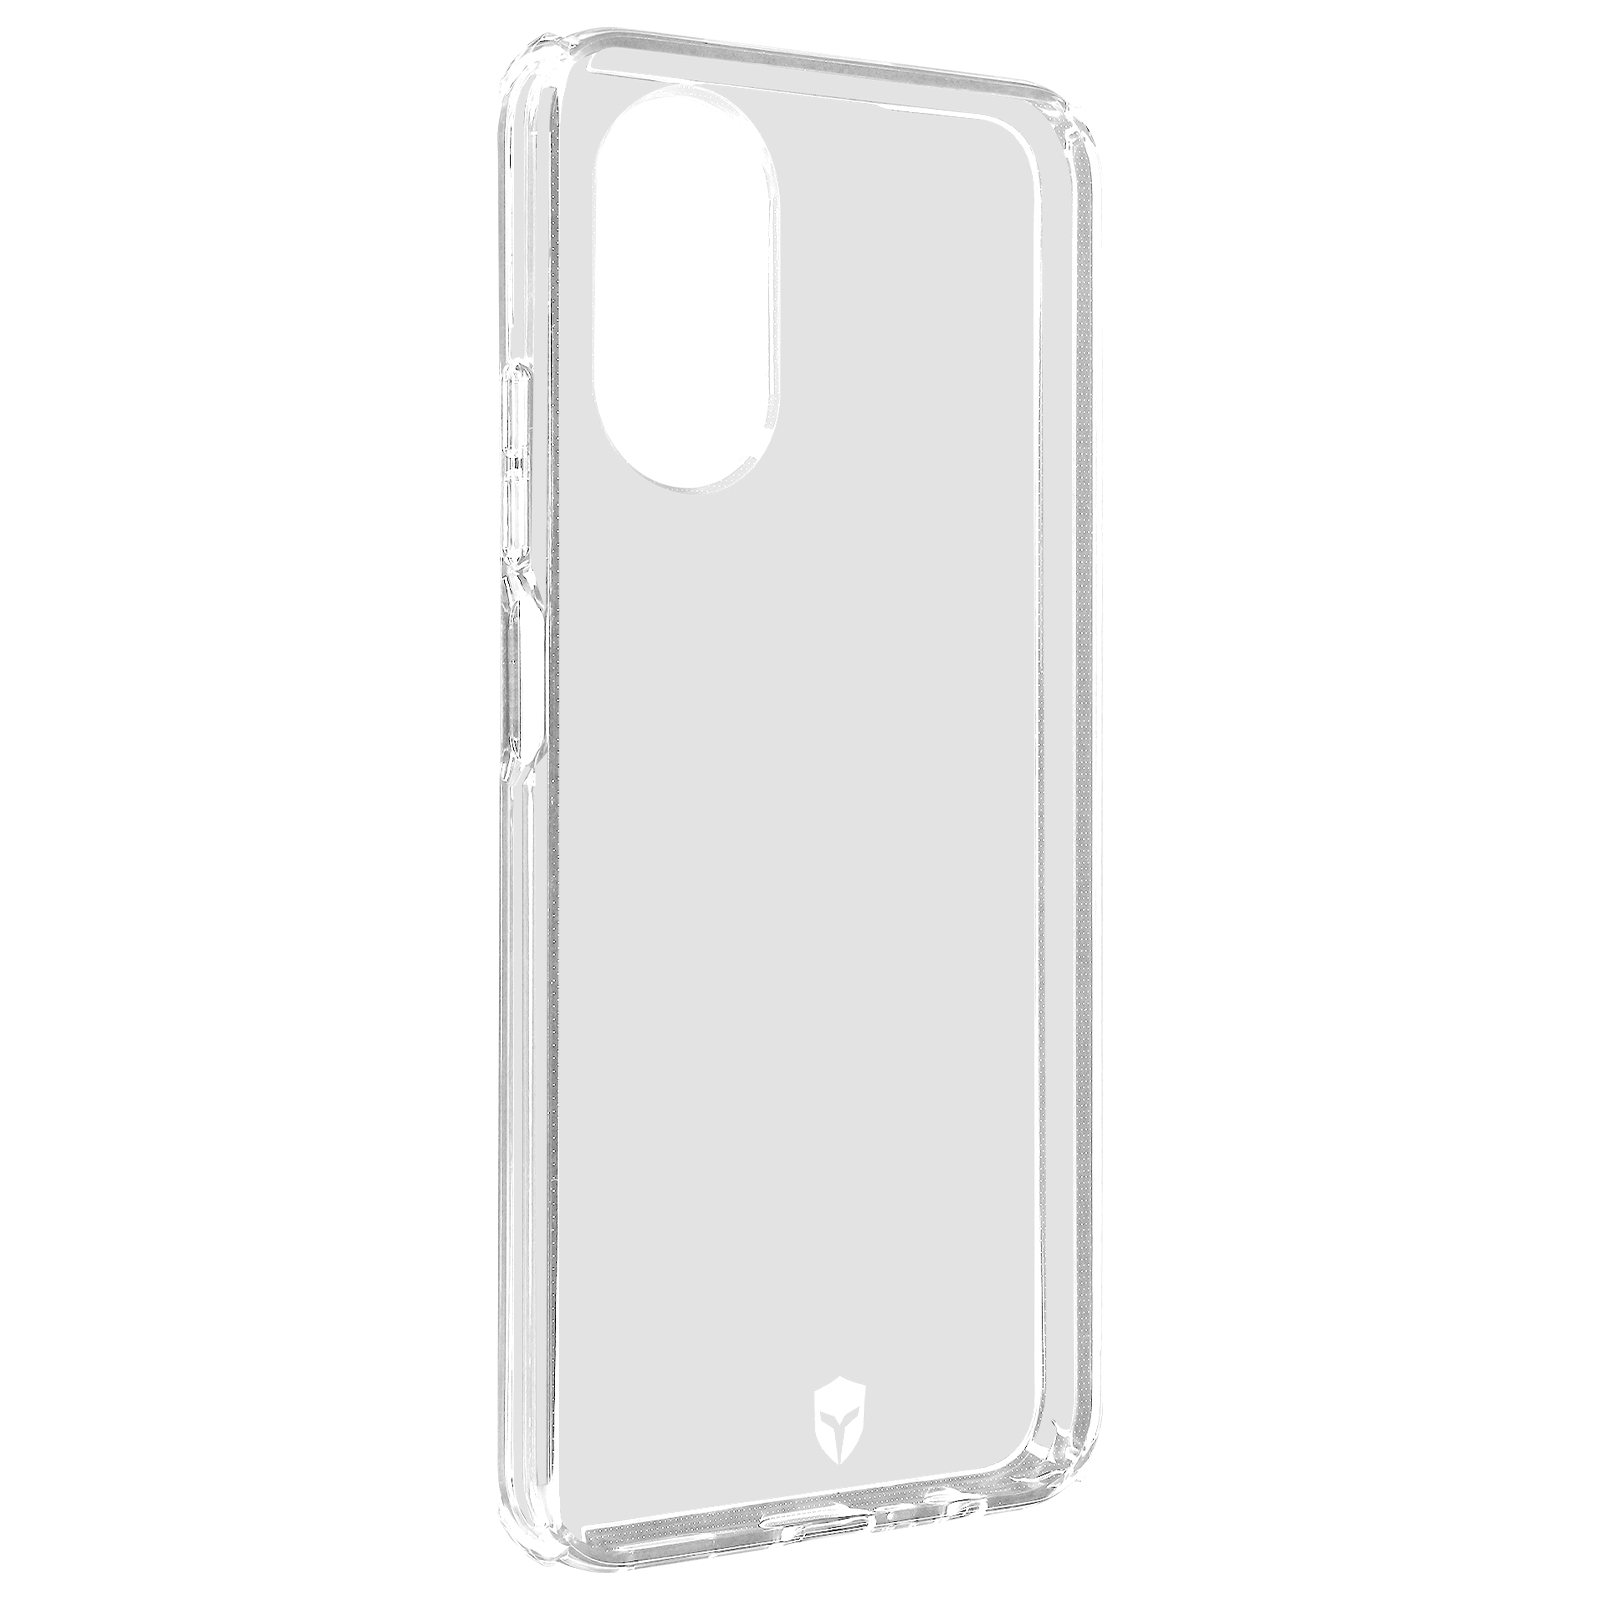 FORCE CASE Feel A17, Backcover, Oppo, Series, Oppo Transparent